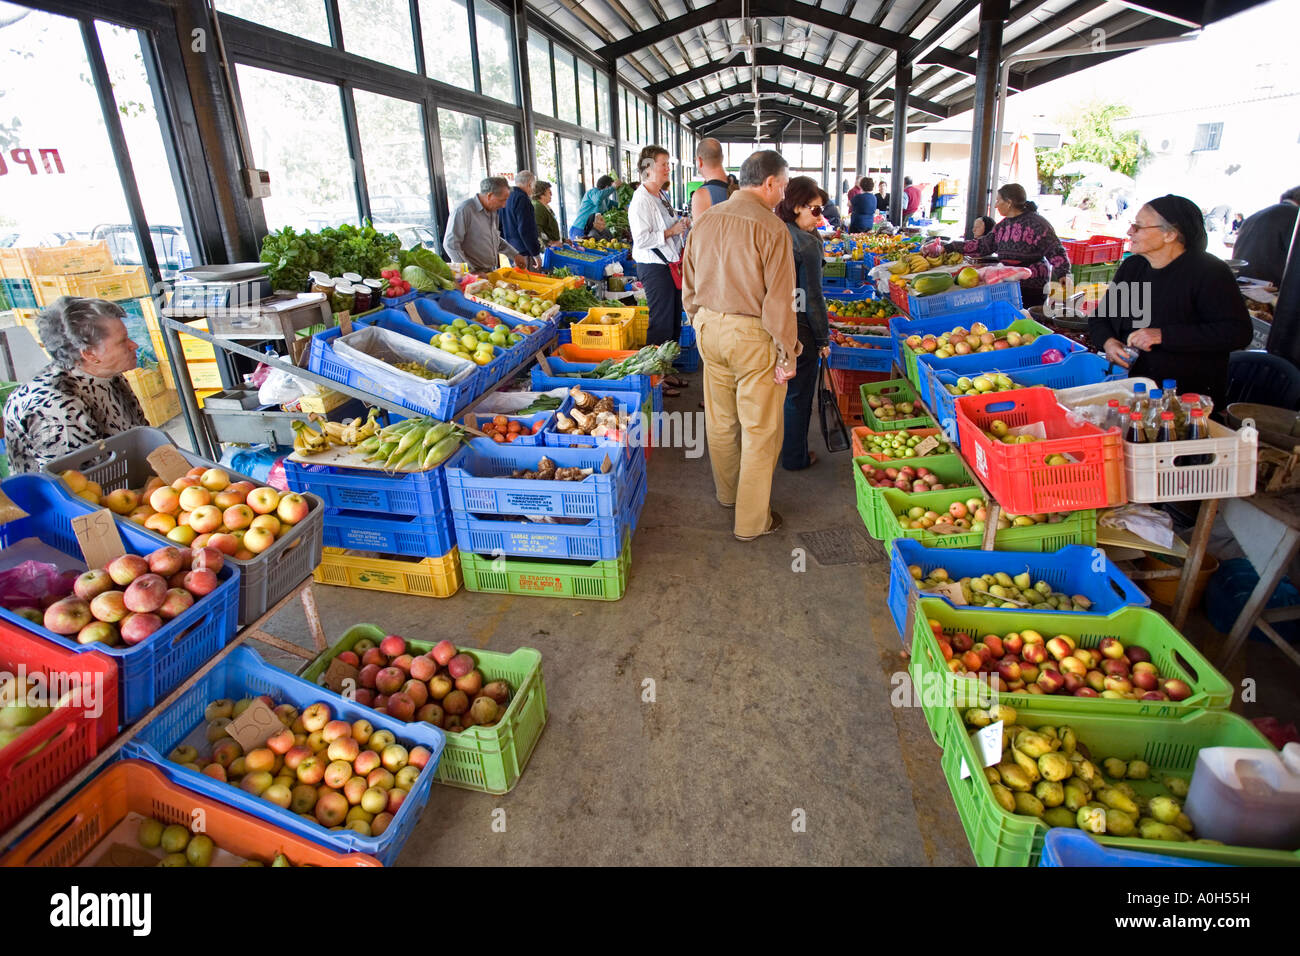 THE OLD MARKET IN PAPHOS, CYPRUS Stock Photo: 9996172 - Alamy